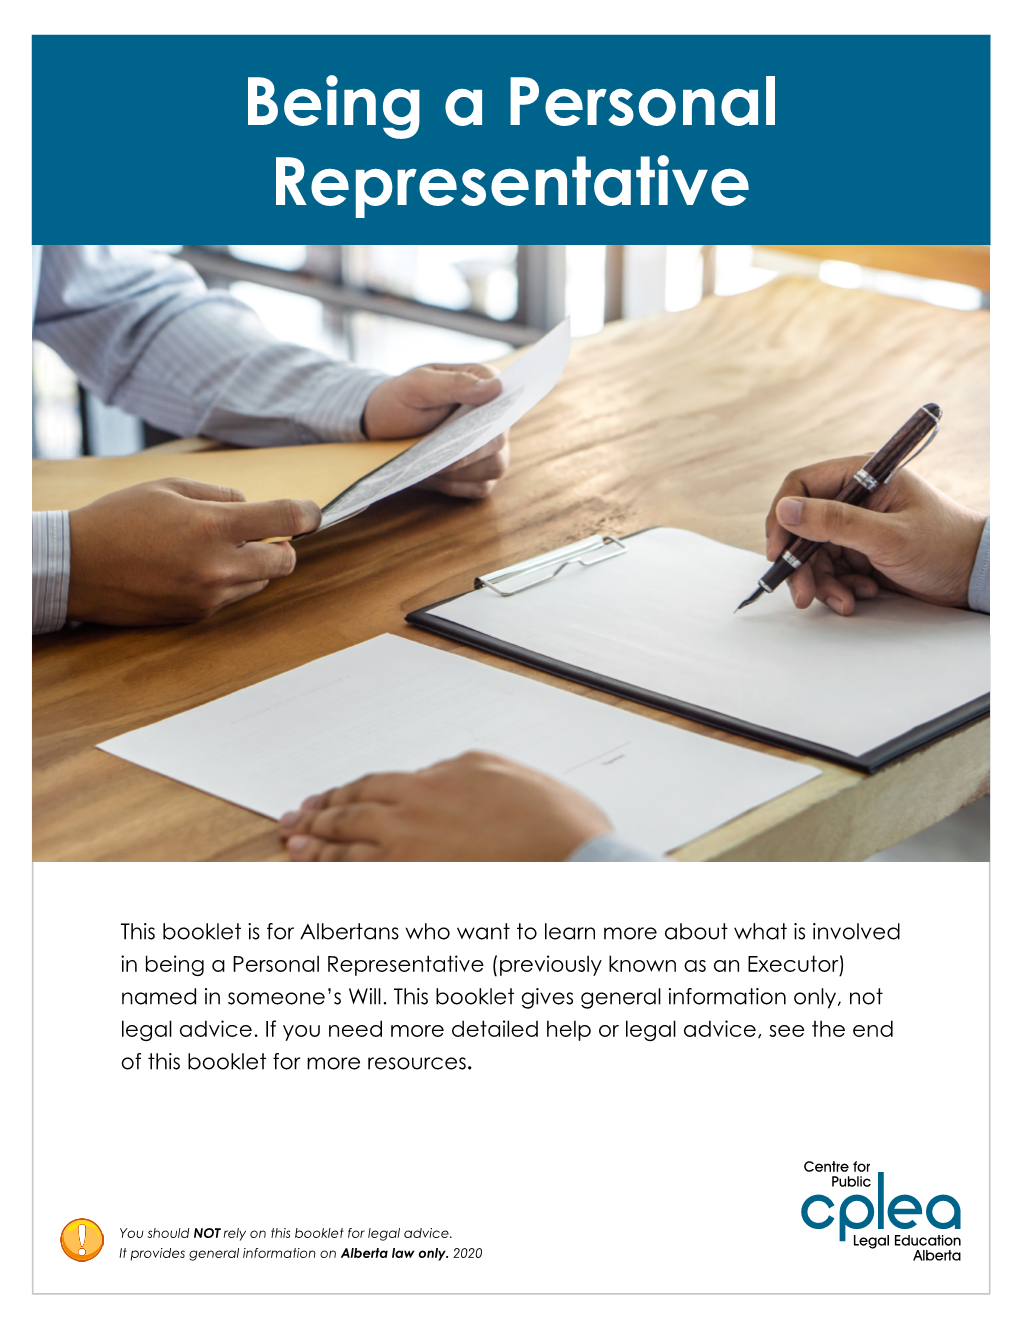 Being a Personal Representative